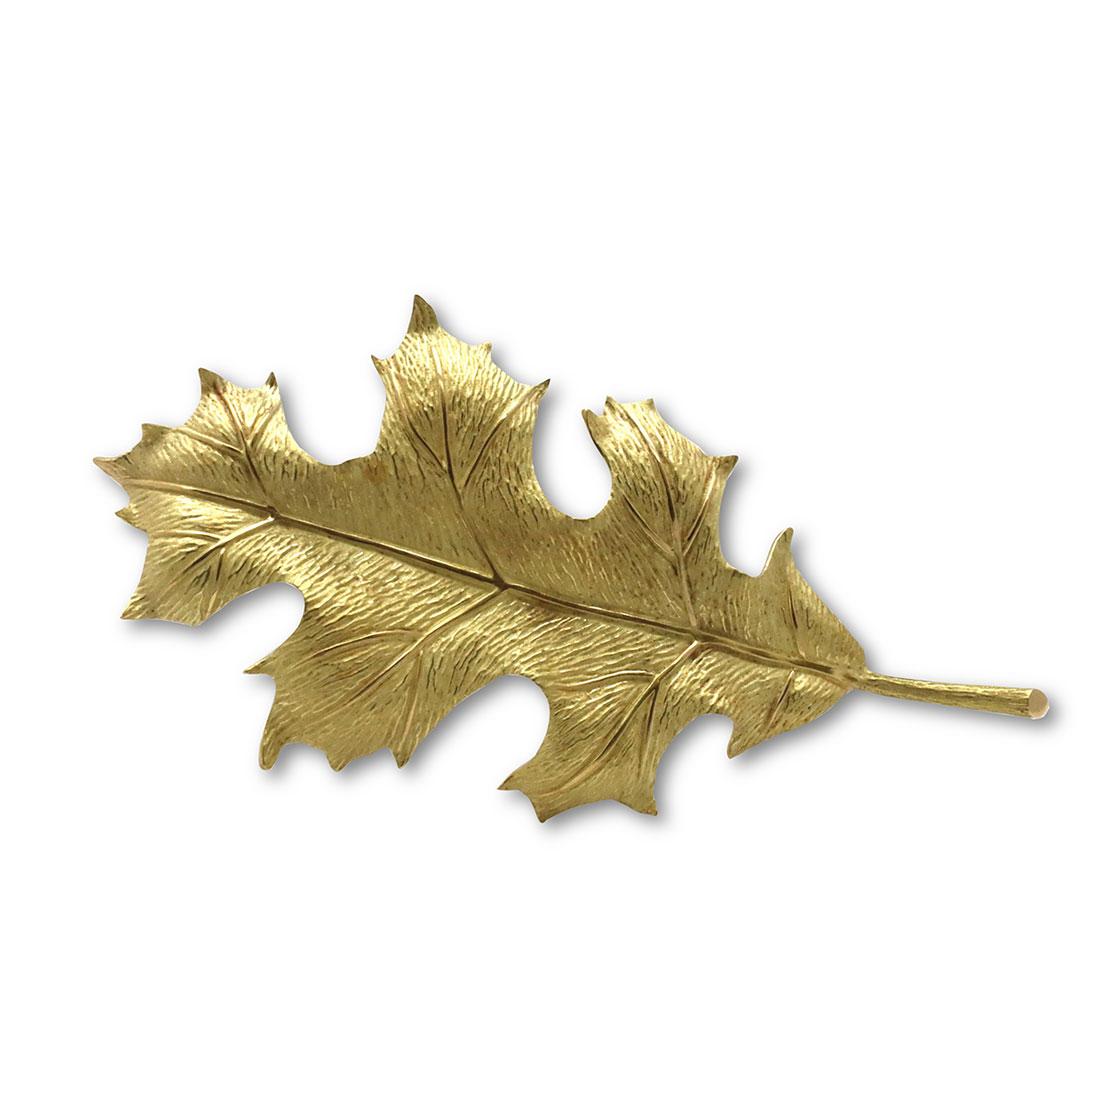 Authentic Tiffany & Co. brooch crafted in 18 karat yellow gold. This stunning brooch features a textured gold leaf design. At its widest points, the brooch measures 2.44 inches x 1.22 inches. Signed Tiffany & Co., 750. This brooch is not presented